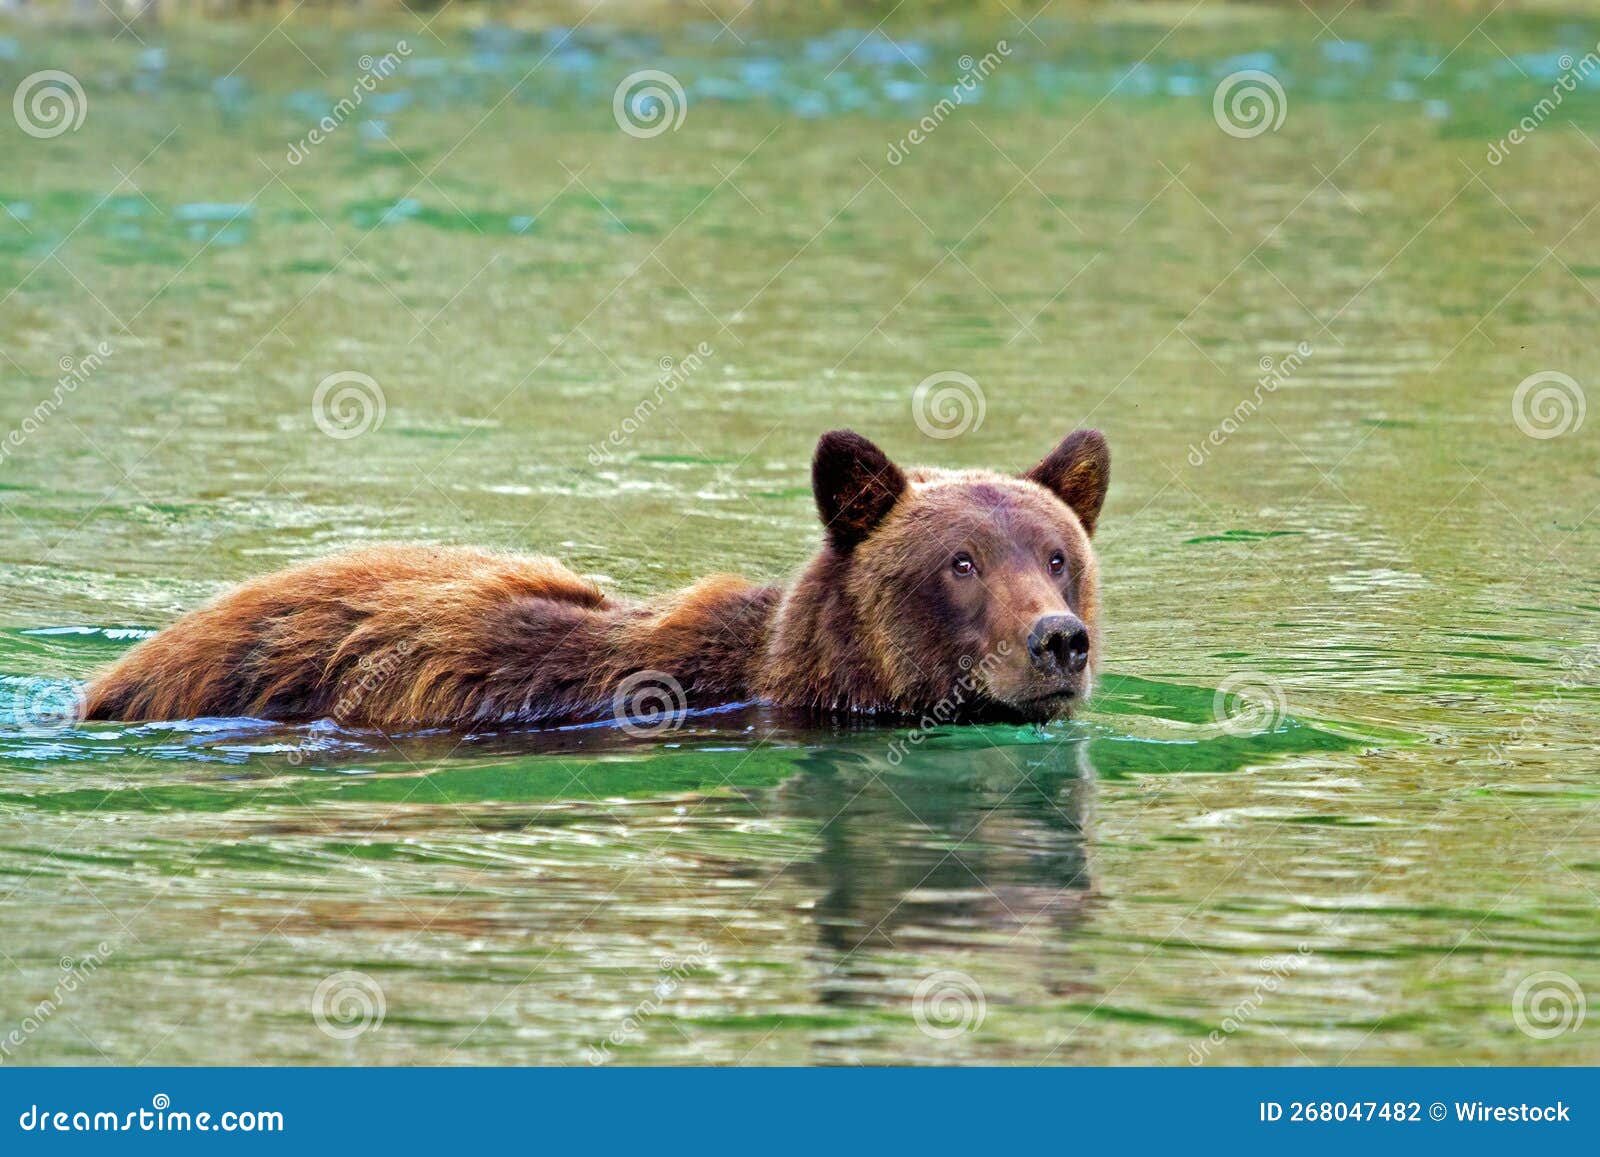 selective focus the brown bear (ursidae) swimming in the lake in the daytime